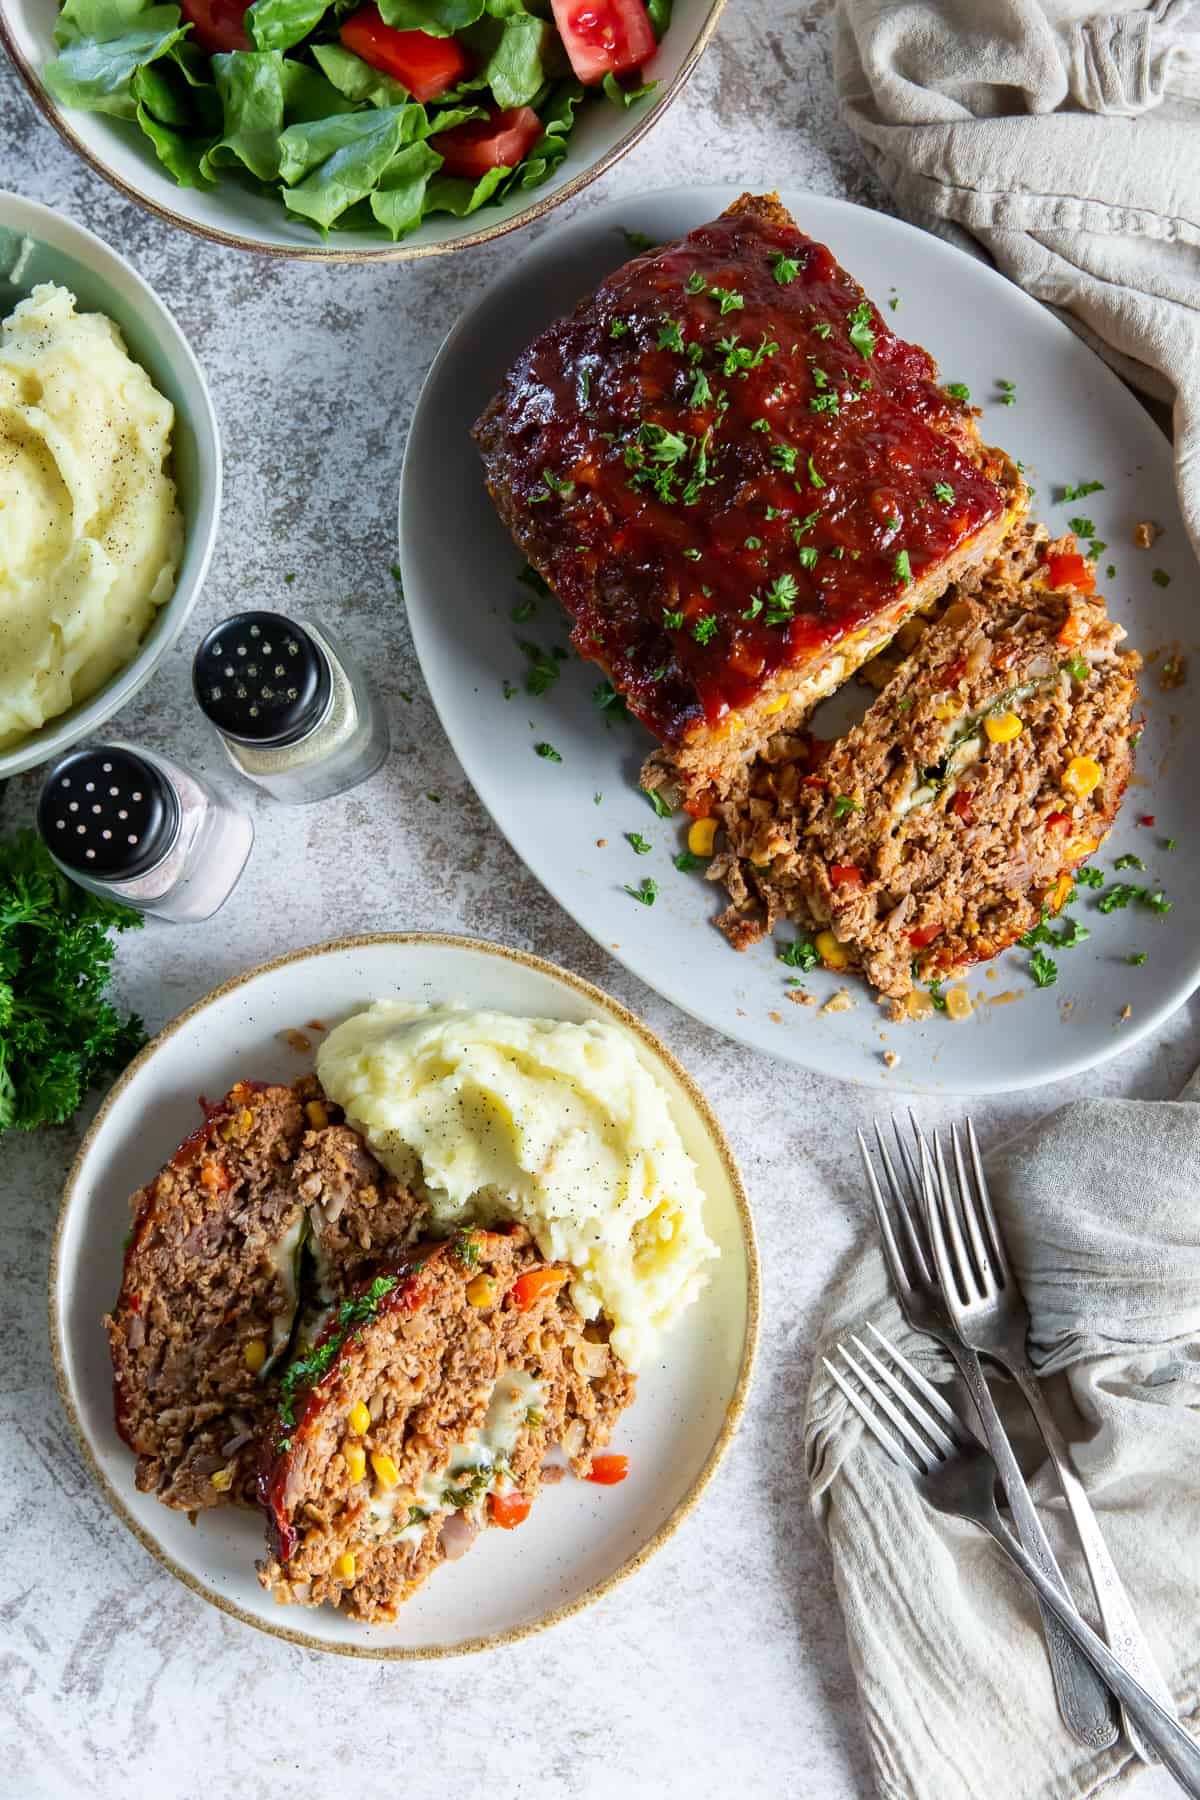 An over the top shot of a meatloaf on a platter next to a dinner plate with mashed potatoes.